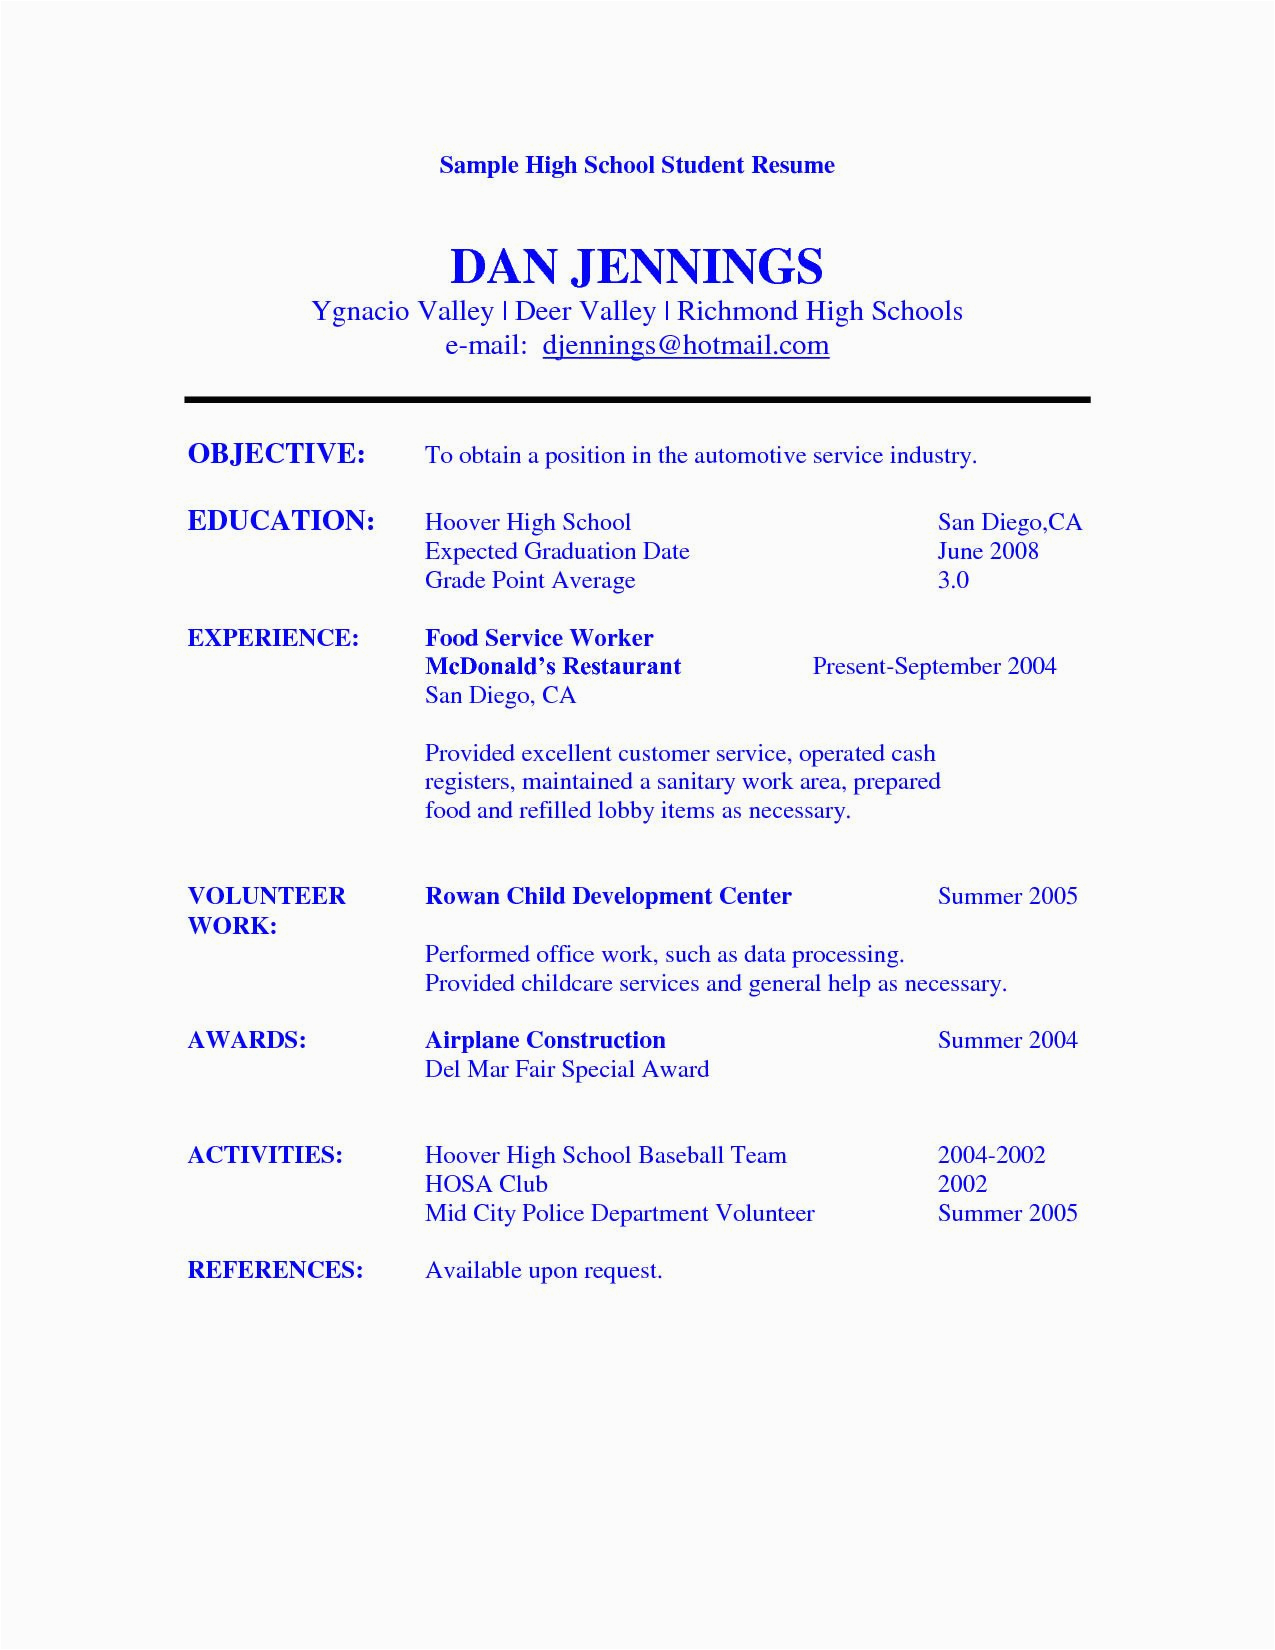 Sample Objectives for Resumes High School Student Pin On Sample Resume Center